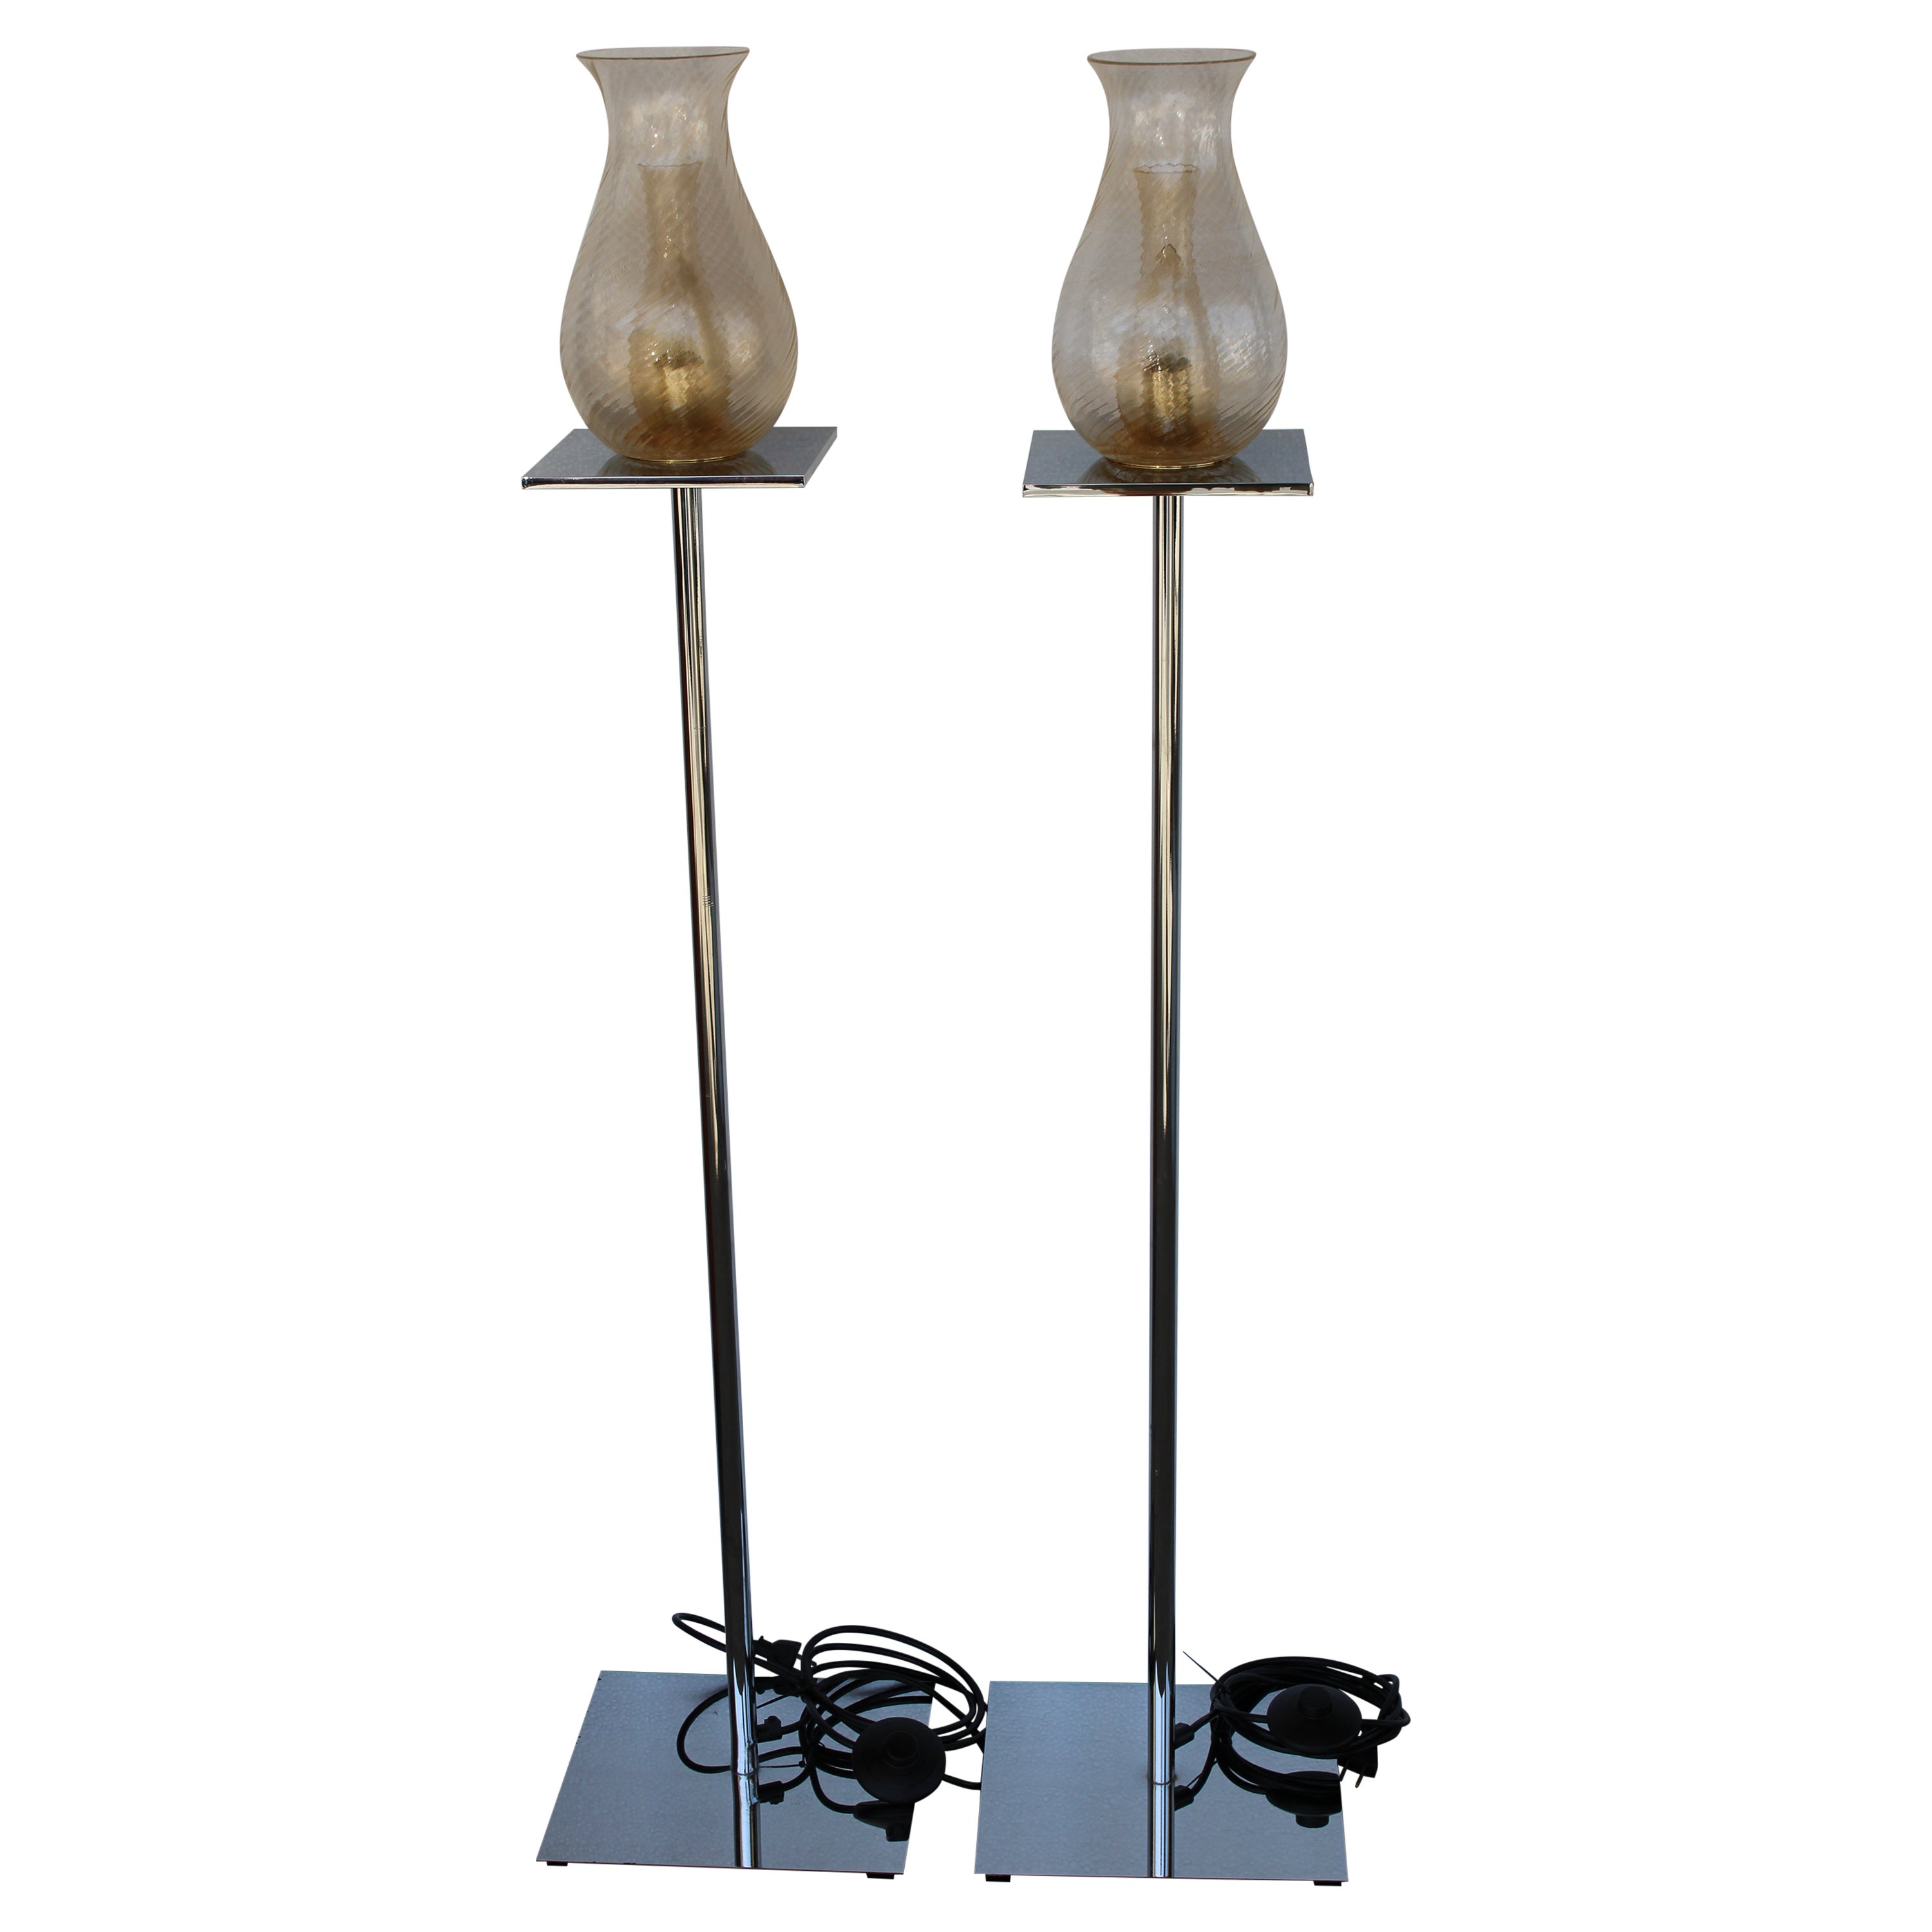 Pair of Floor Lamps by Philippe Starck for the Clift Hotel, San Francisco, CA